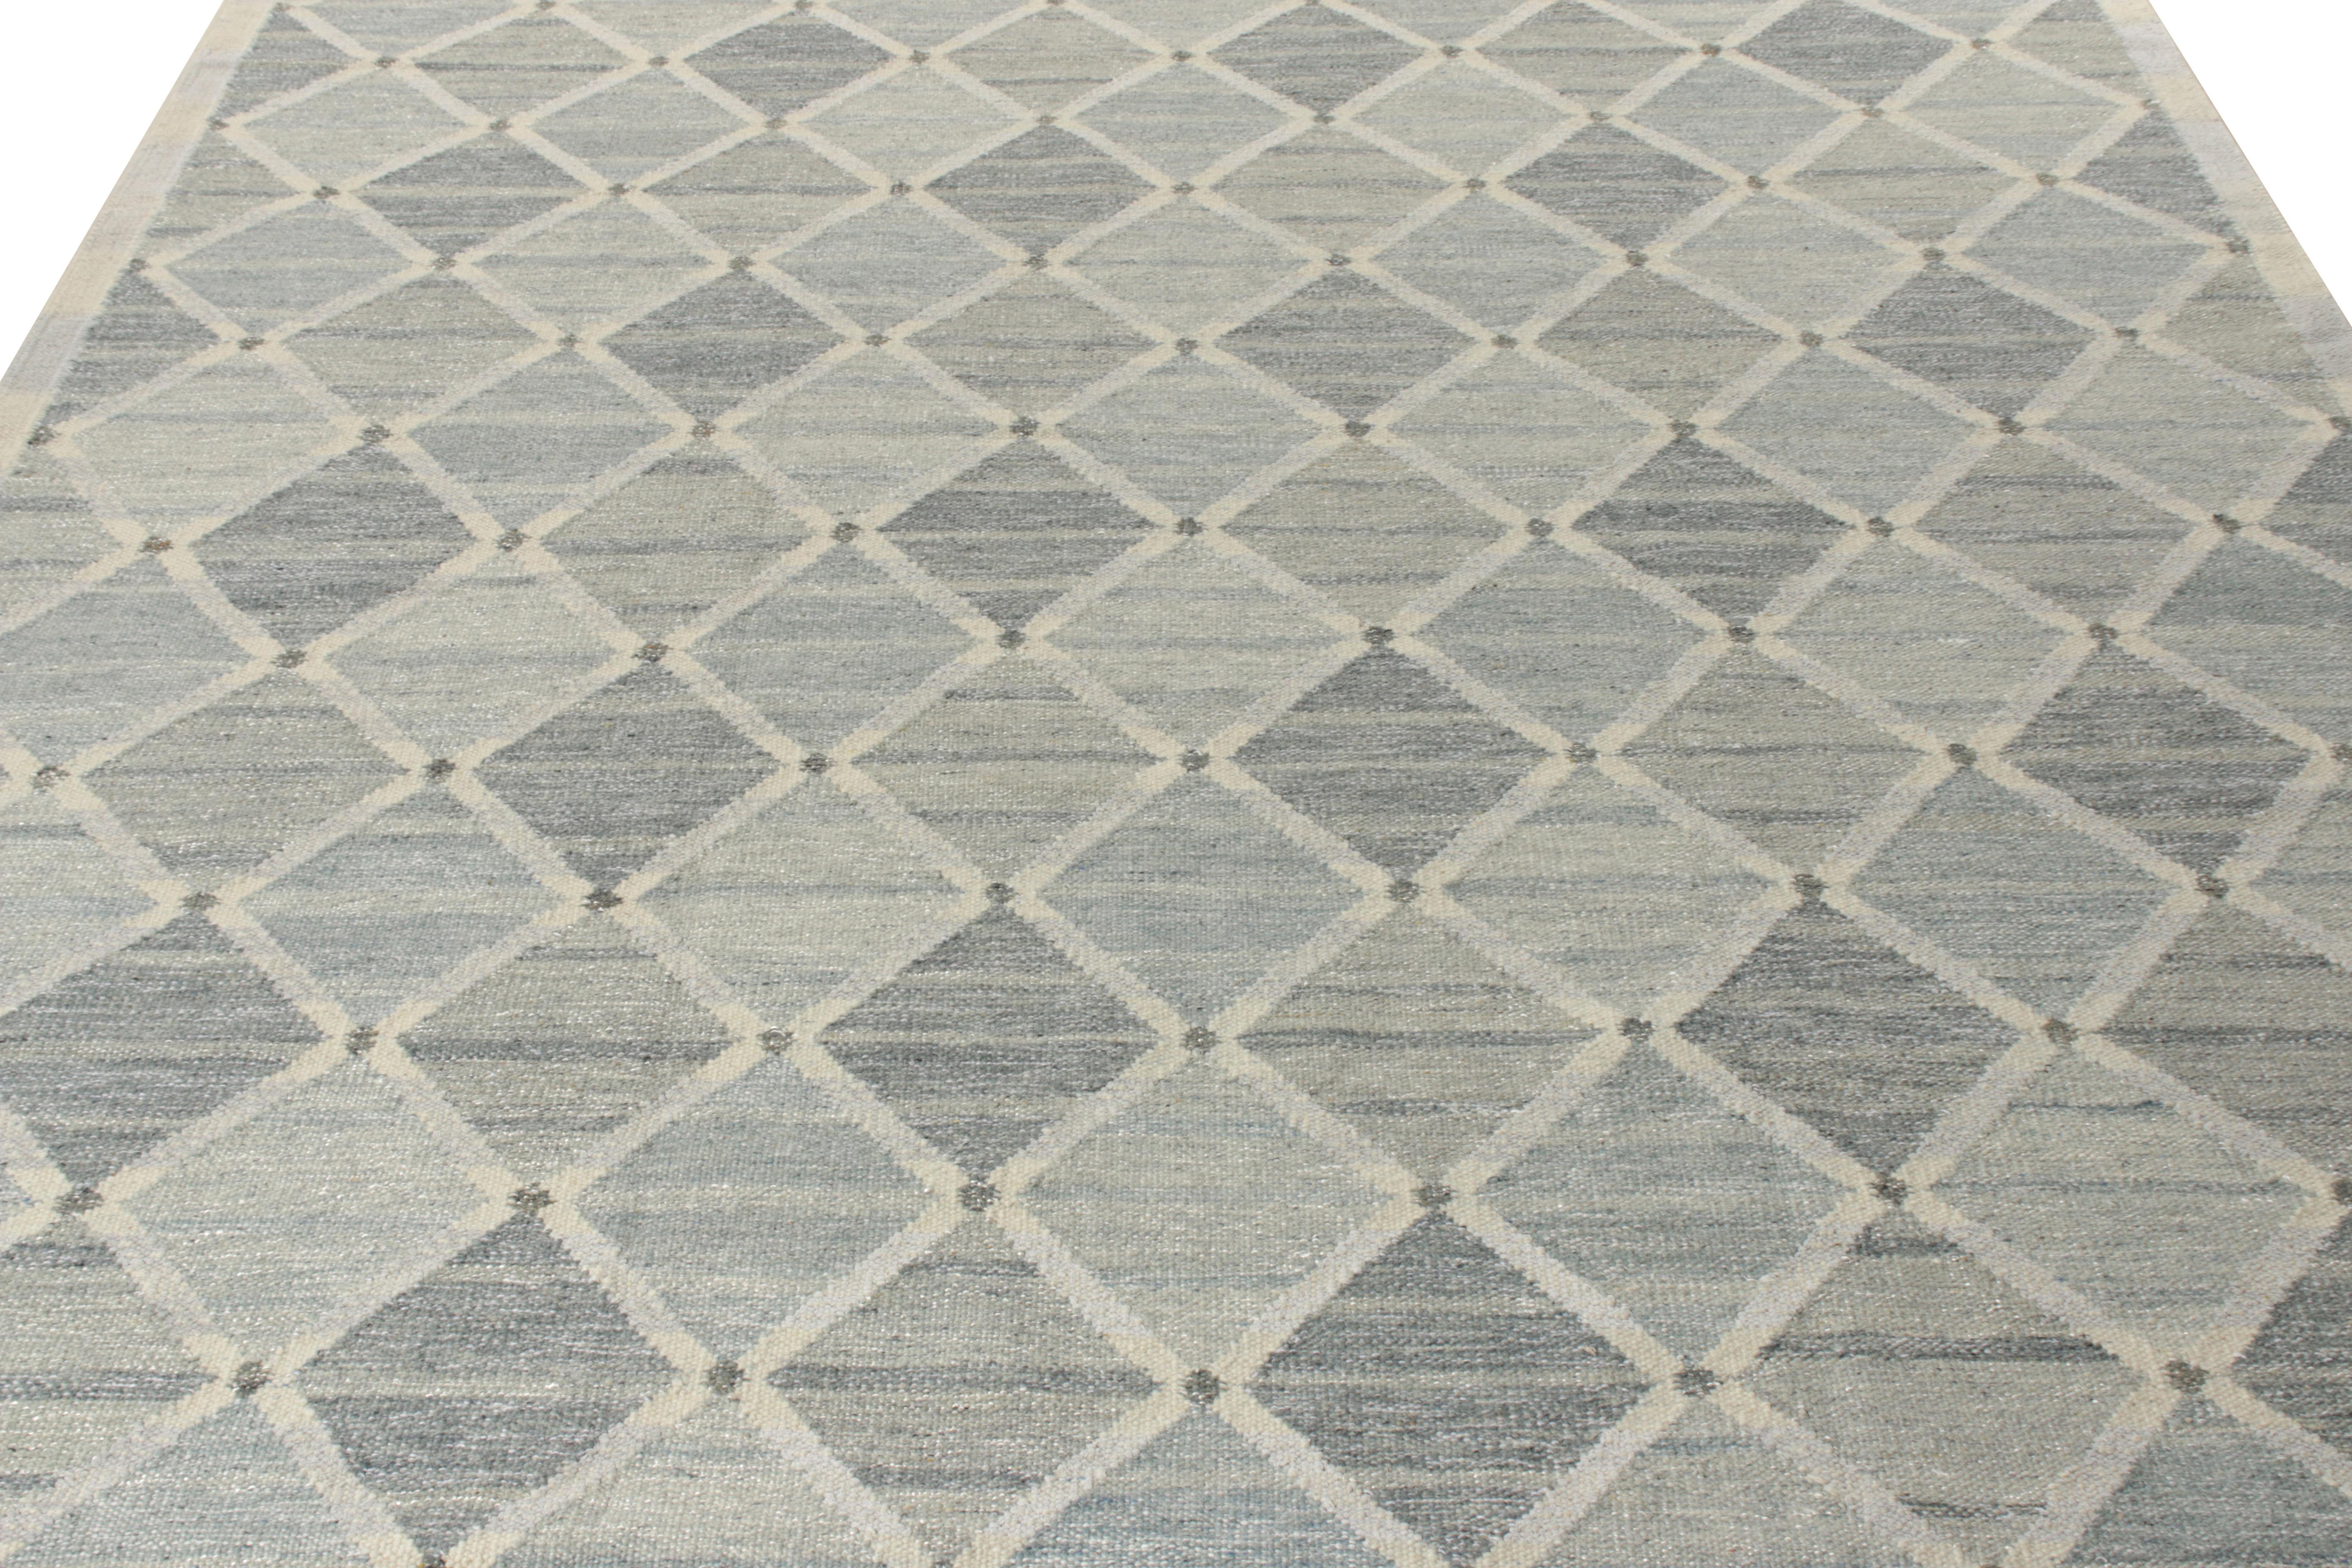 A gorgeous custom flat weave from Rug & Kilim’s Scandinavian Kilim Collection. Exemplified in this 10x14 edition, the flatweave carries a cool composure with soothing tones of blue and gray covering the scale with a classic, cozy abrashed look. The